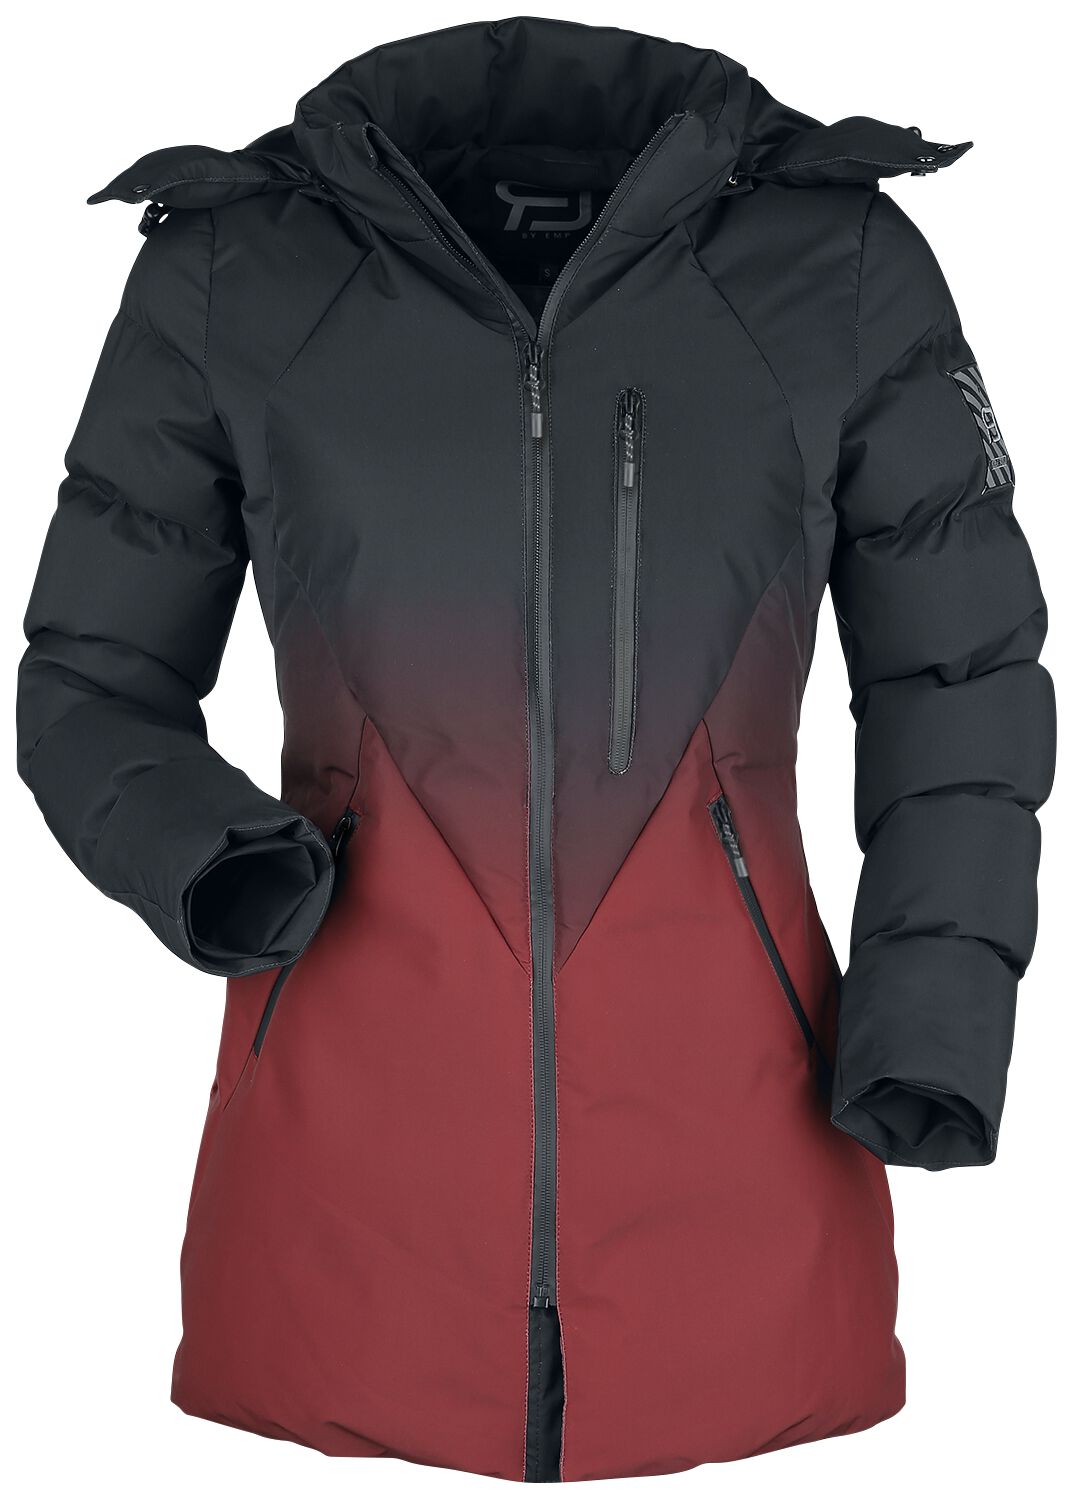 Image of Giacca di mezza stagione di RED by EMP - Winter Jacket with Black-Red Colour Gradient - S a XL - Donna - nero/rosso